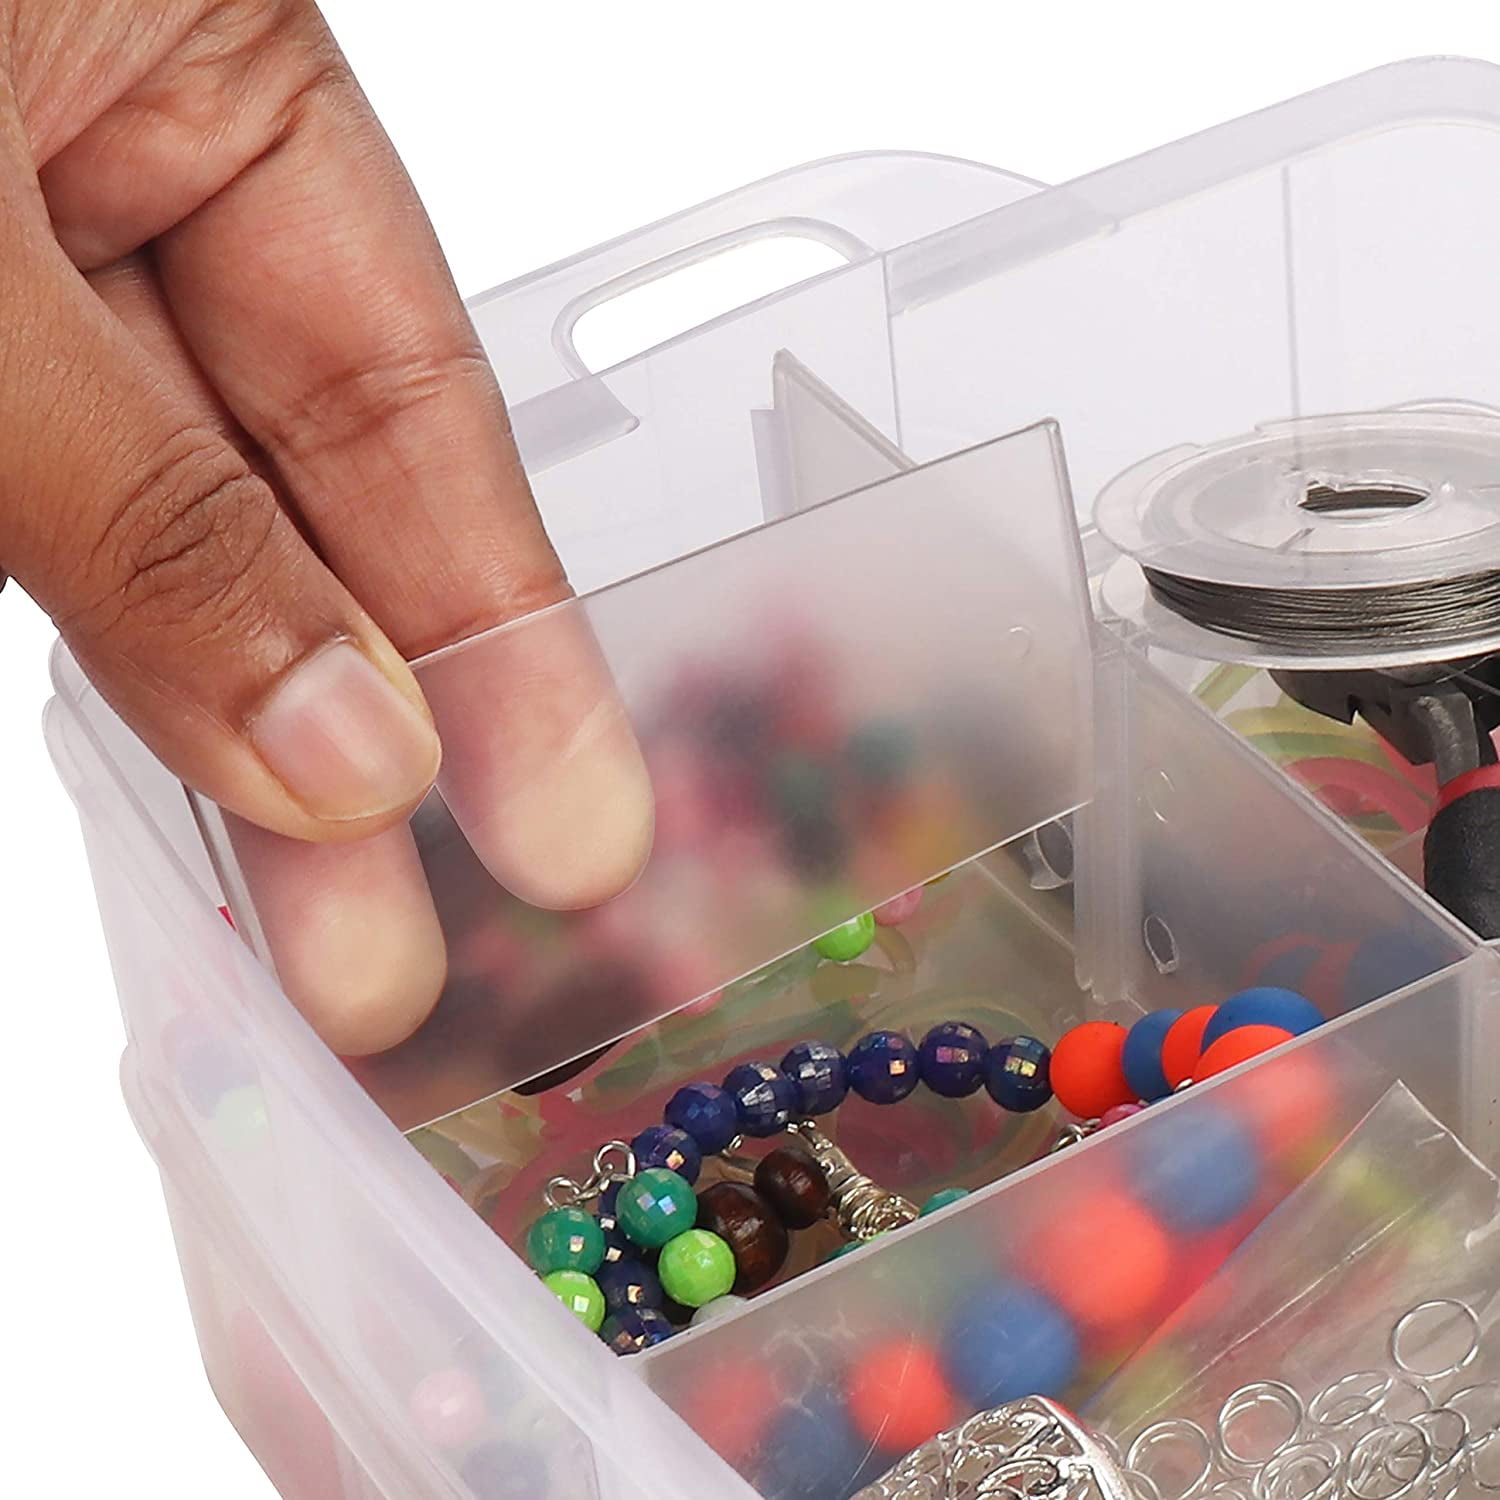 3-layer Stackable Craft Storage Containers - Clear Plastic Craft